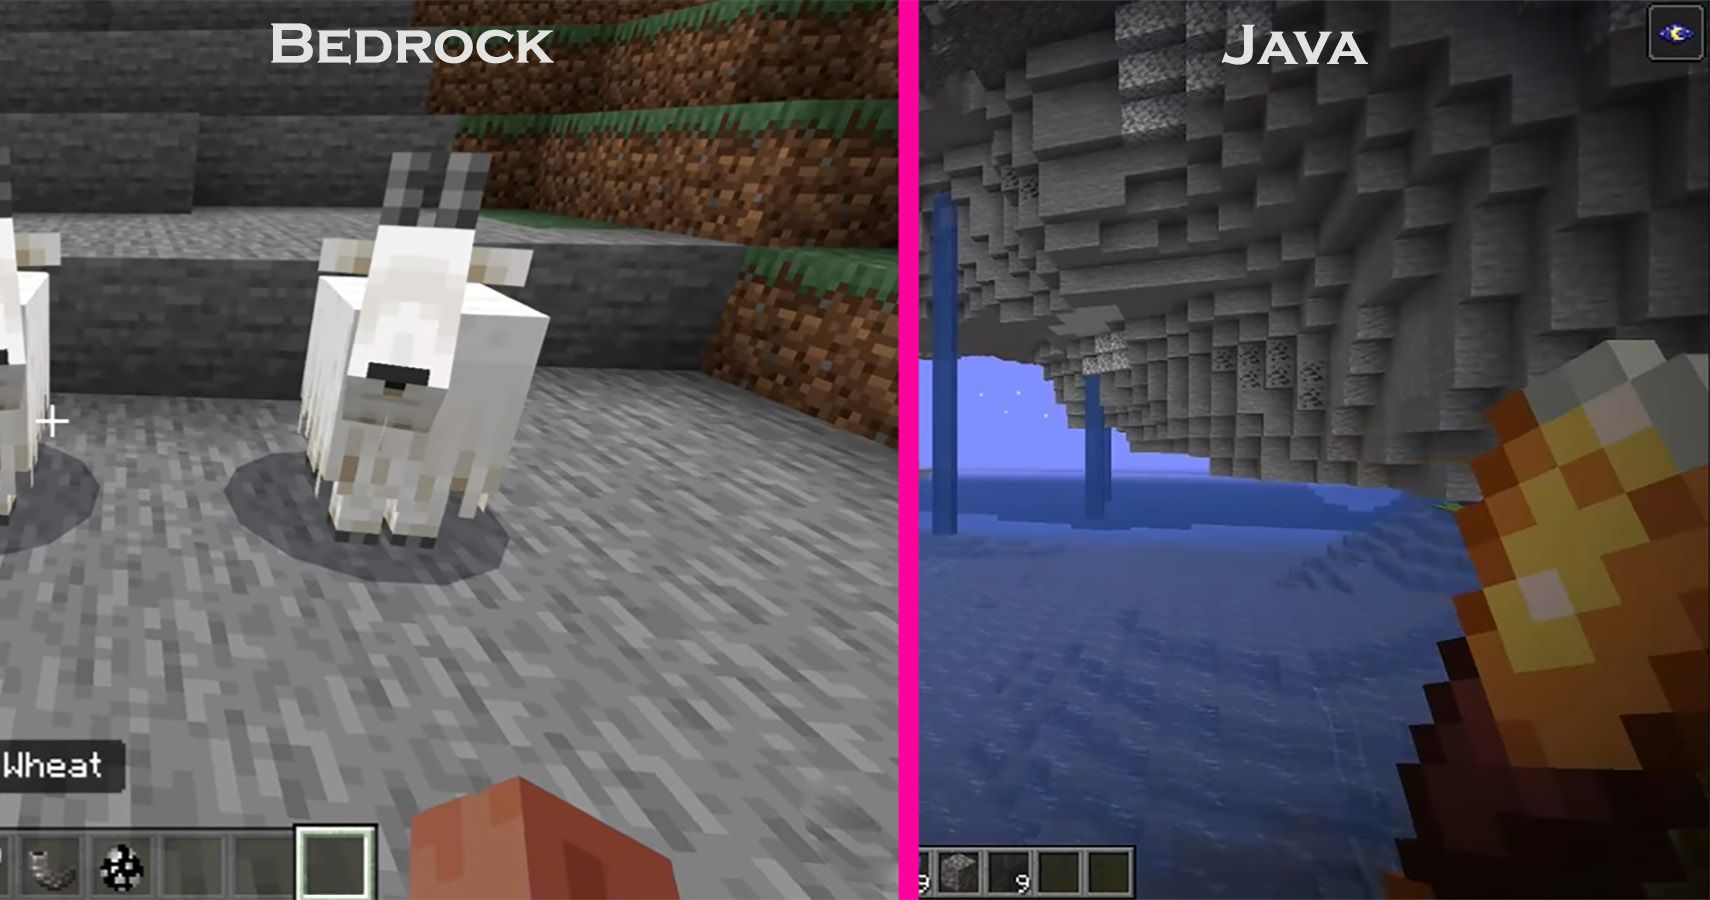 Mountain goats from the bedrock beta and caves from the java snapshot